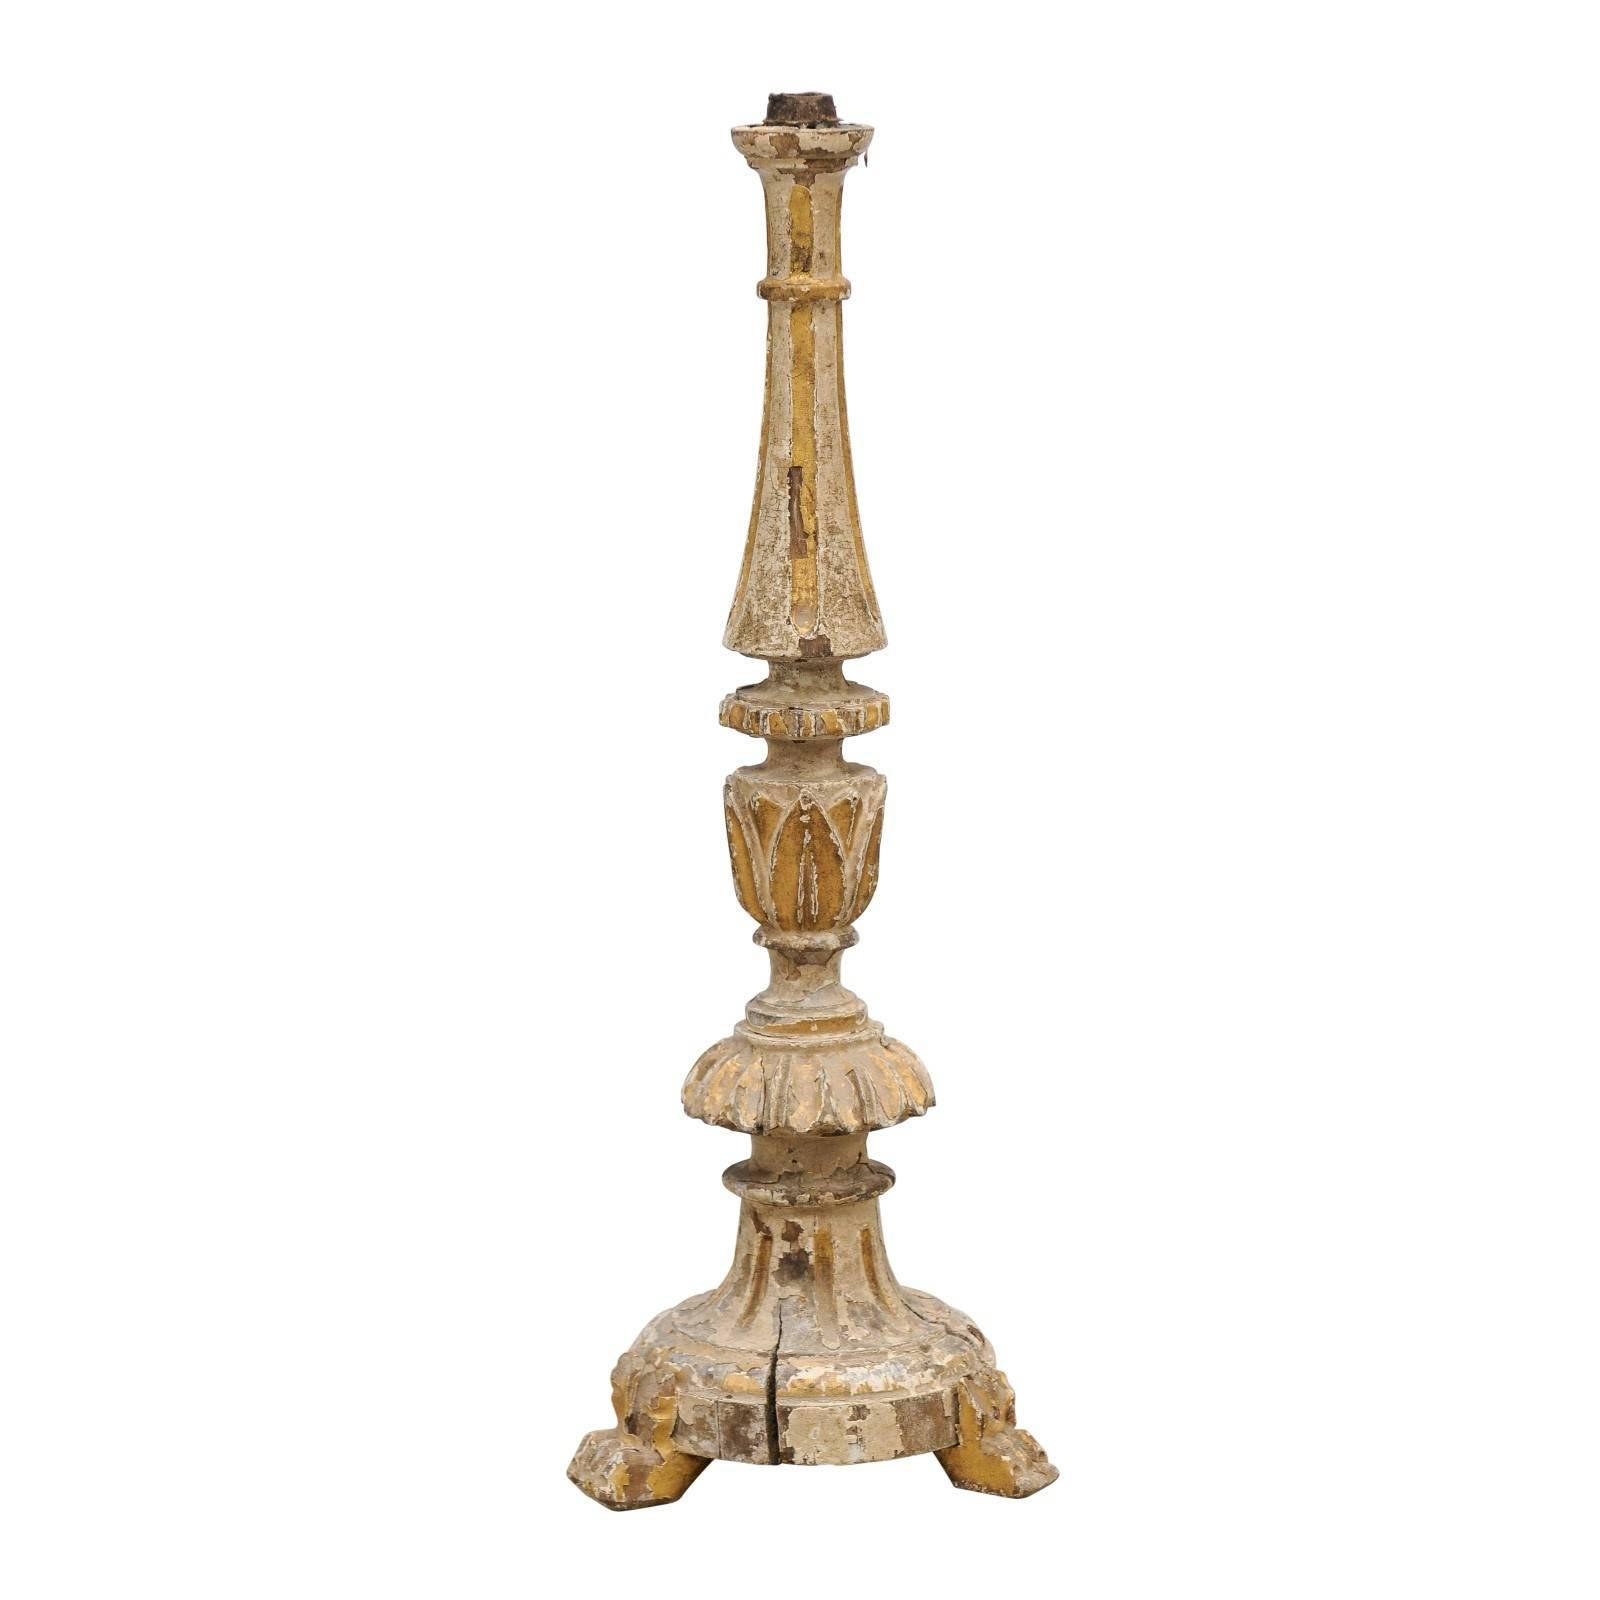 Petite Painted and Gilded Portuguese 18th Century Candlestick with Rais-de-Coeur